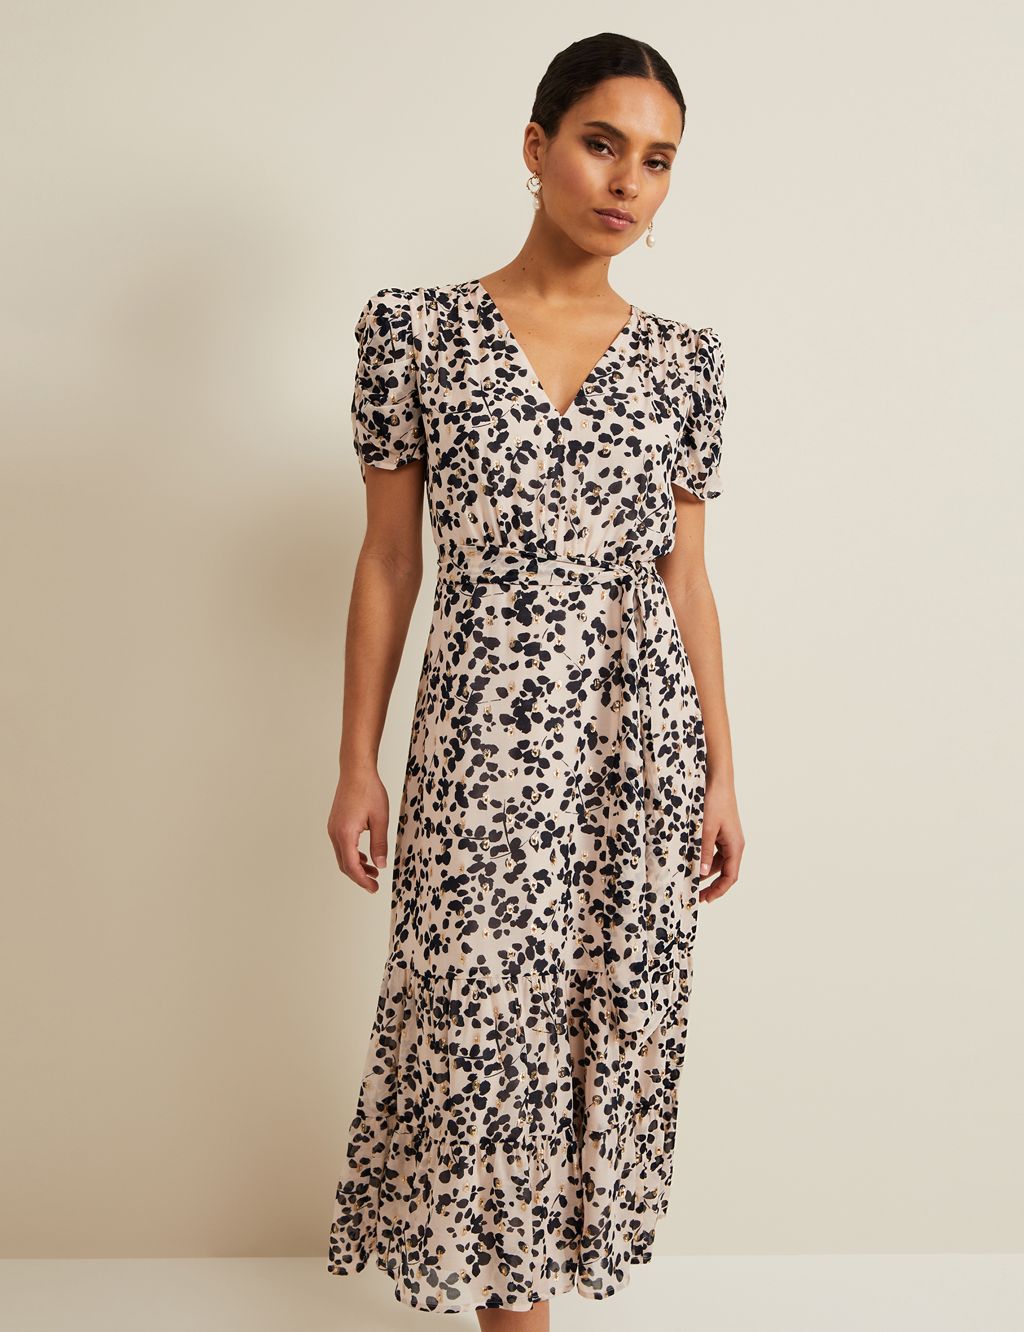 Floral Midi Shirred Dress | Phase Eight | M&S